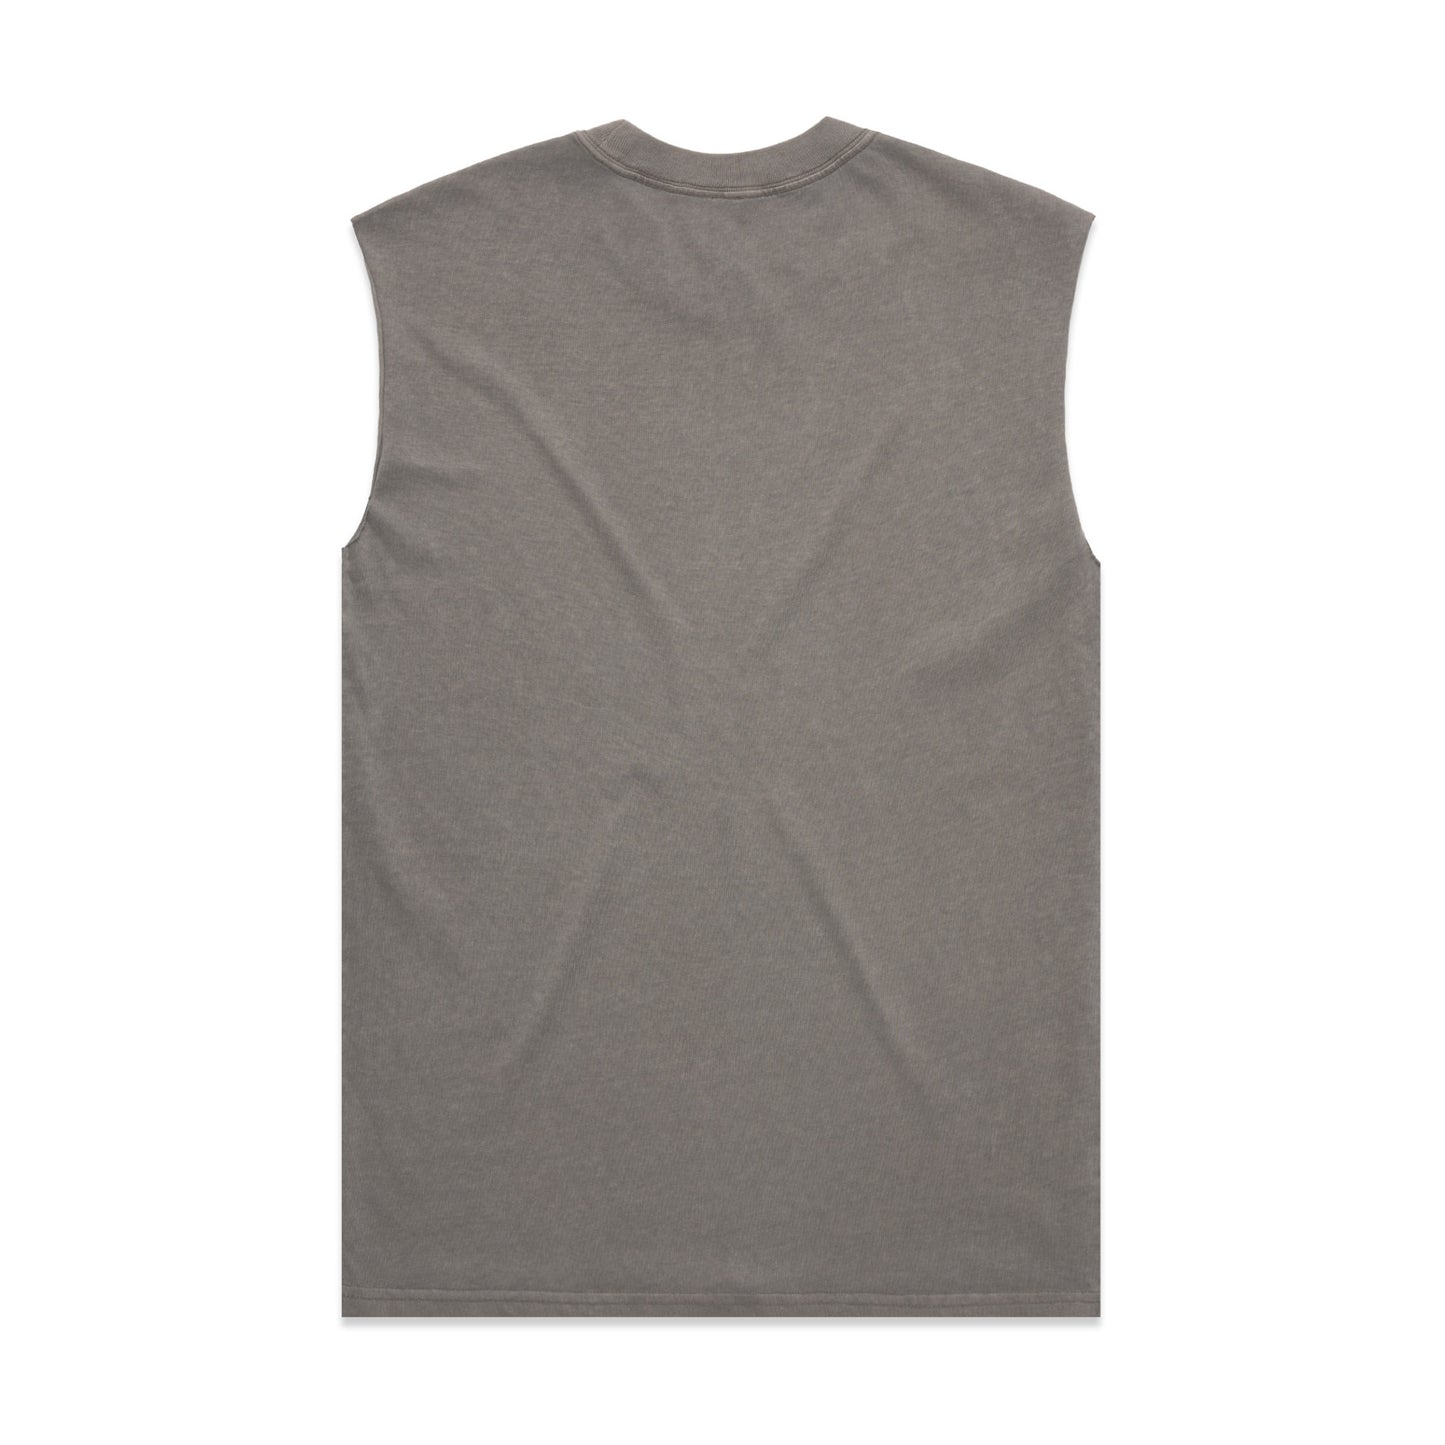 WELCOME TANK - FADED GREY